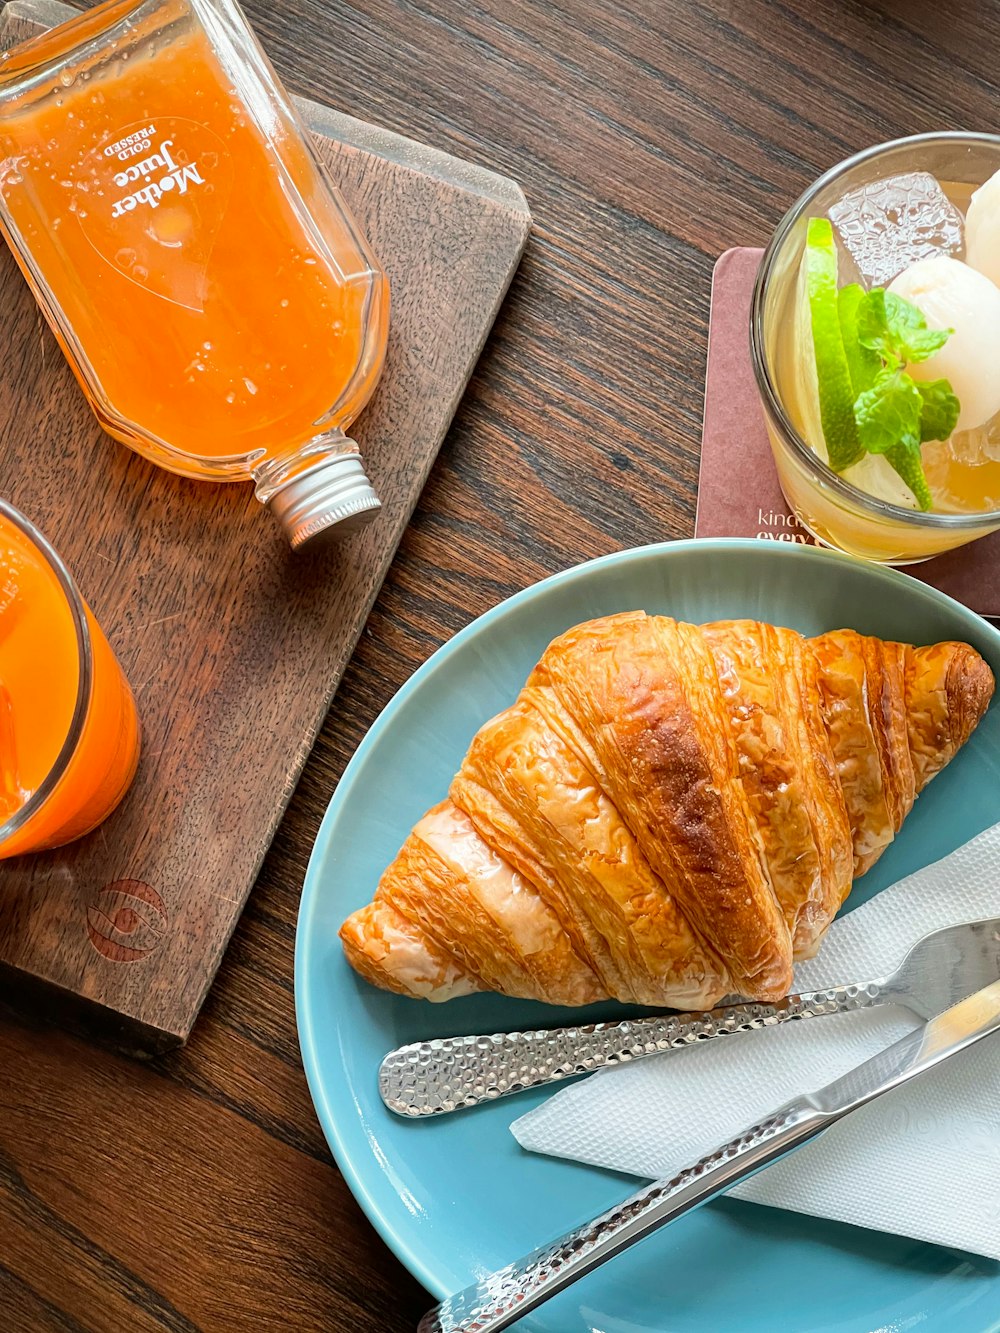 a croissant on a blue plate next to a glass of orange juice